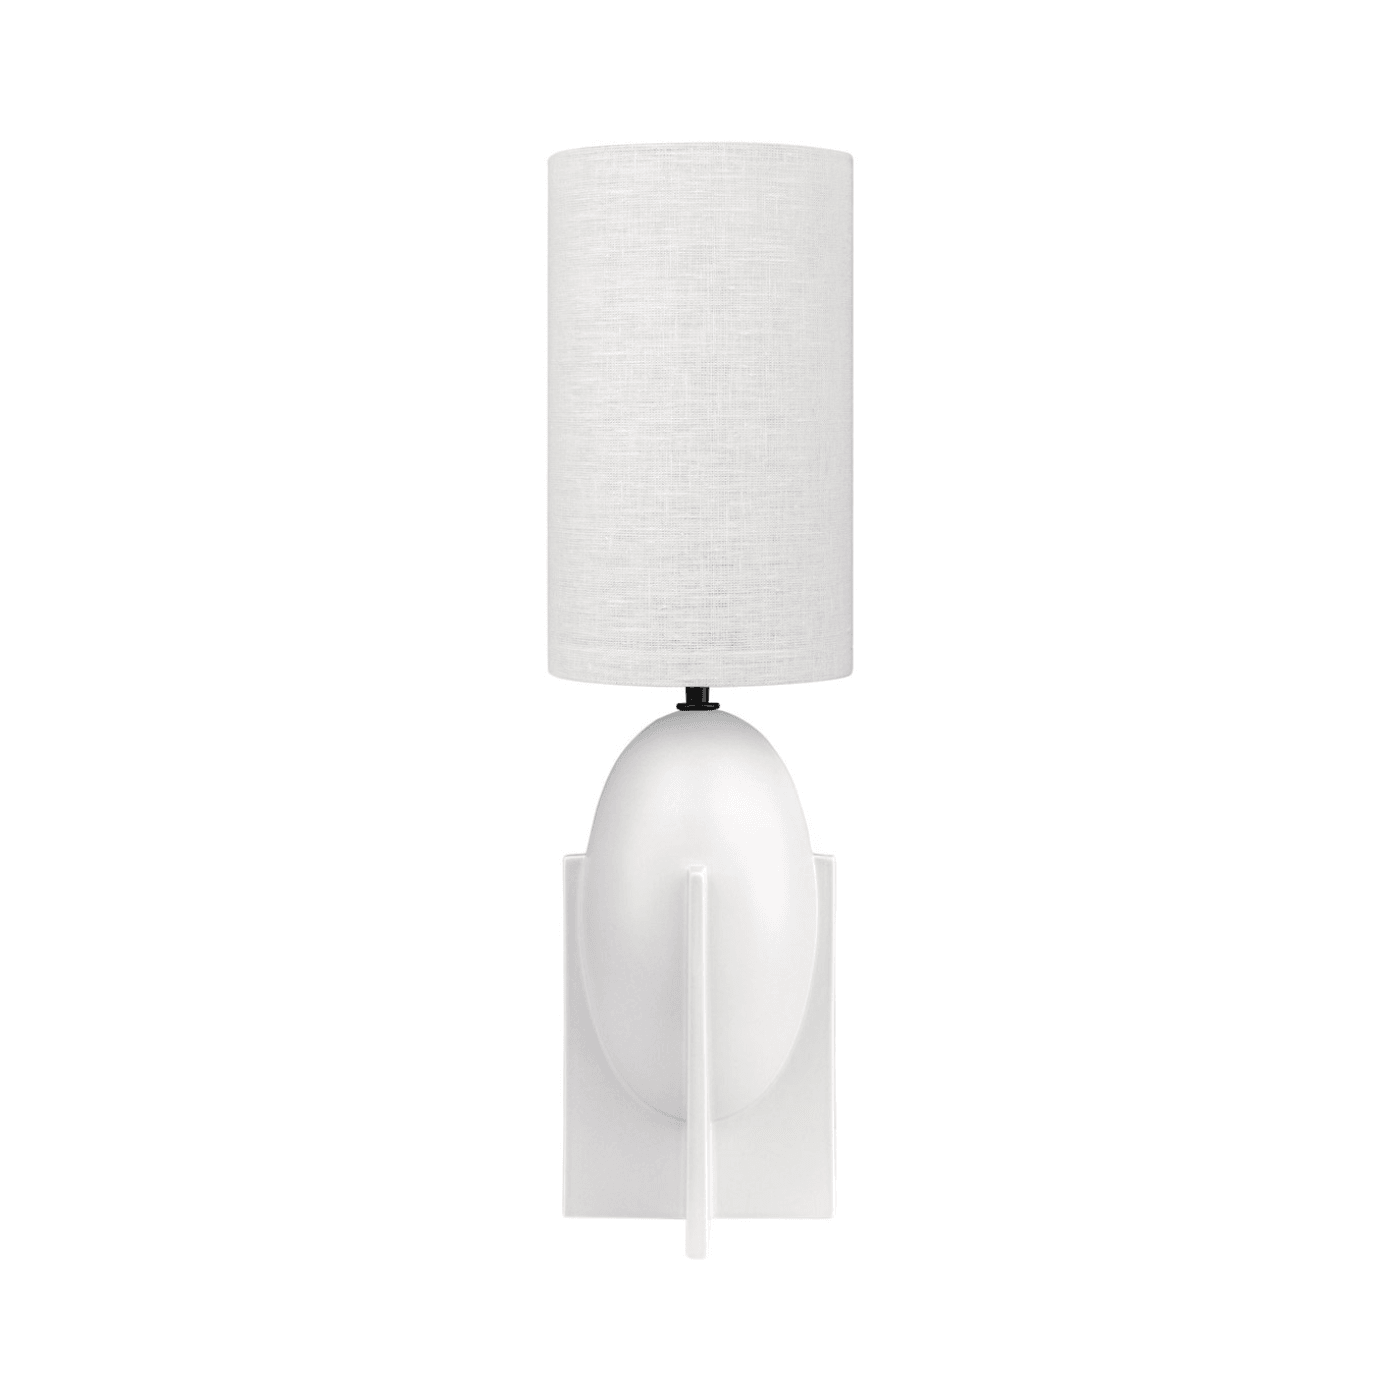 OVO 2 Earthenware Table Lamp with Shade - Maison Rêves UK